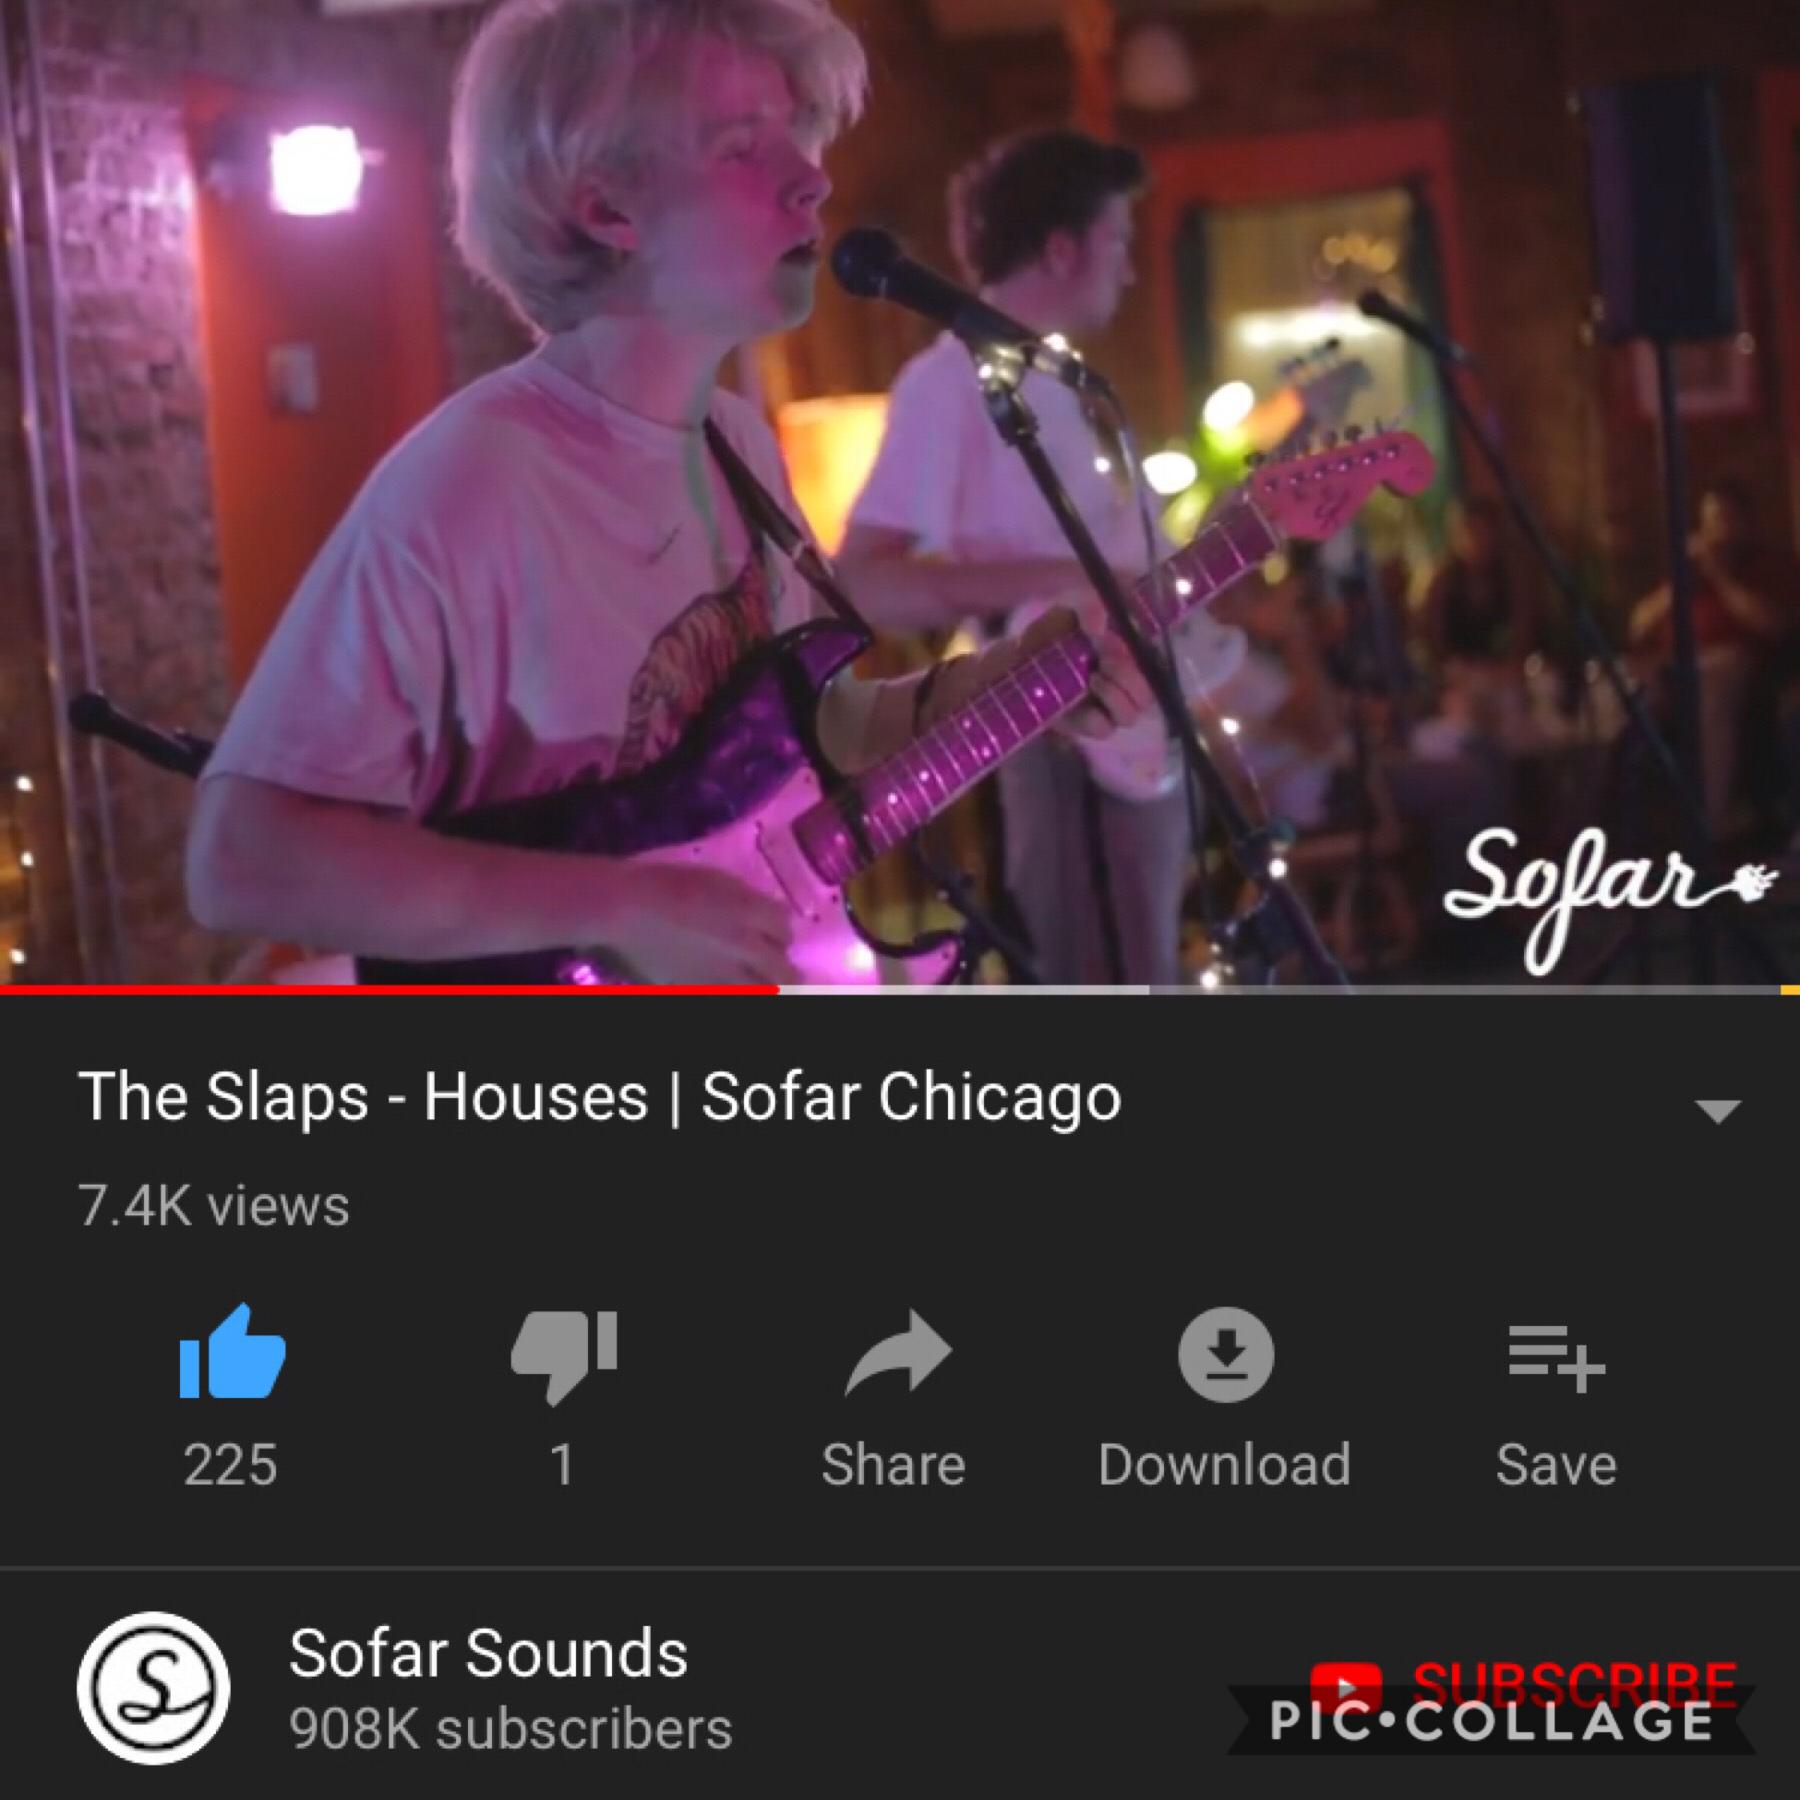 the slaps were one of the opening  bands for lunar vacation and im rly sad that the lead singer's microphone wasn't very loud at the show bc after watching this video, his voice has me mesmerized the :(